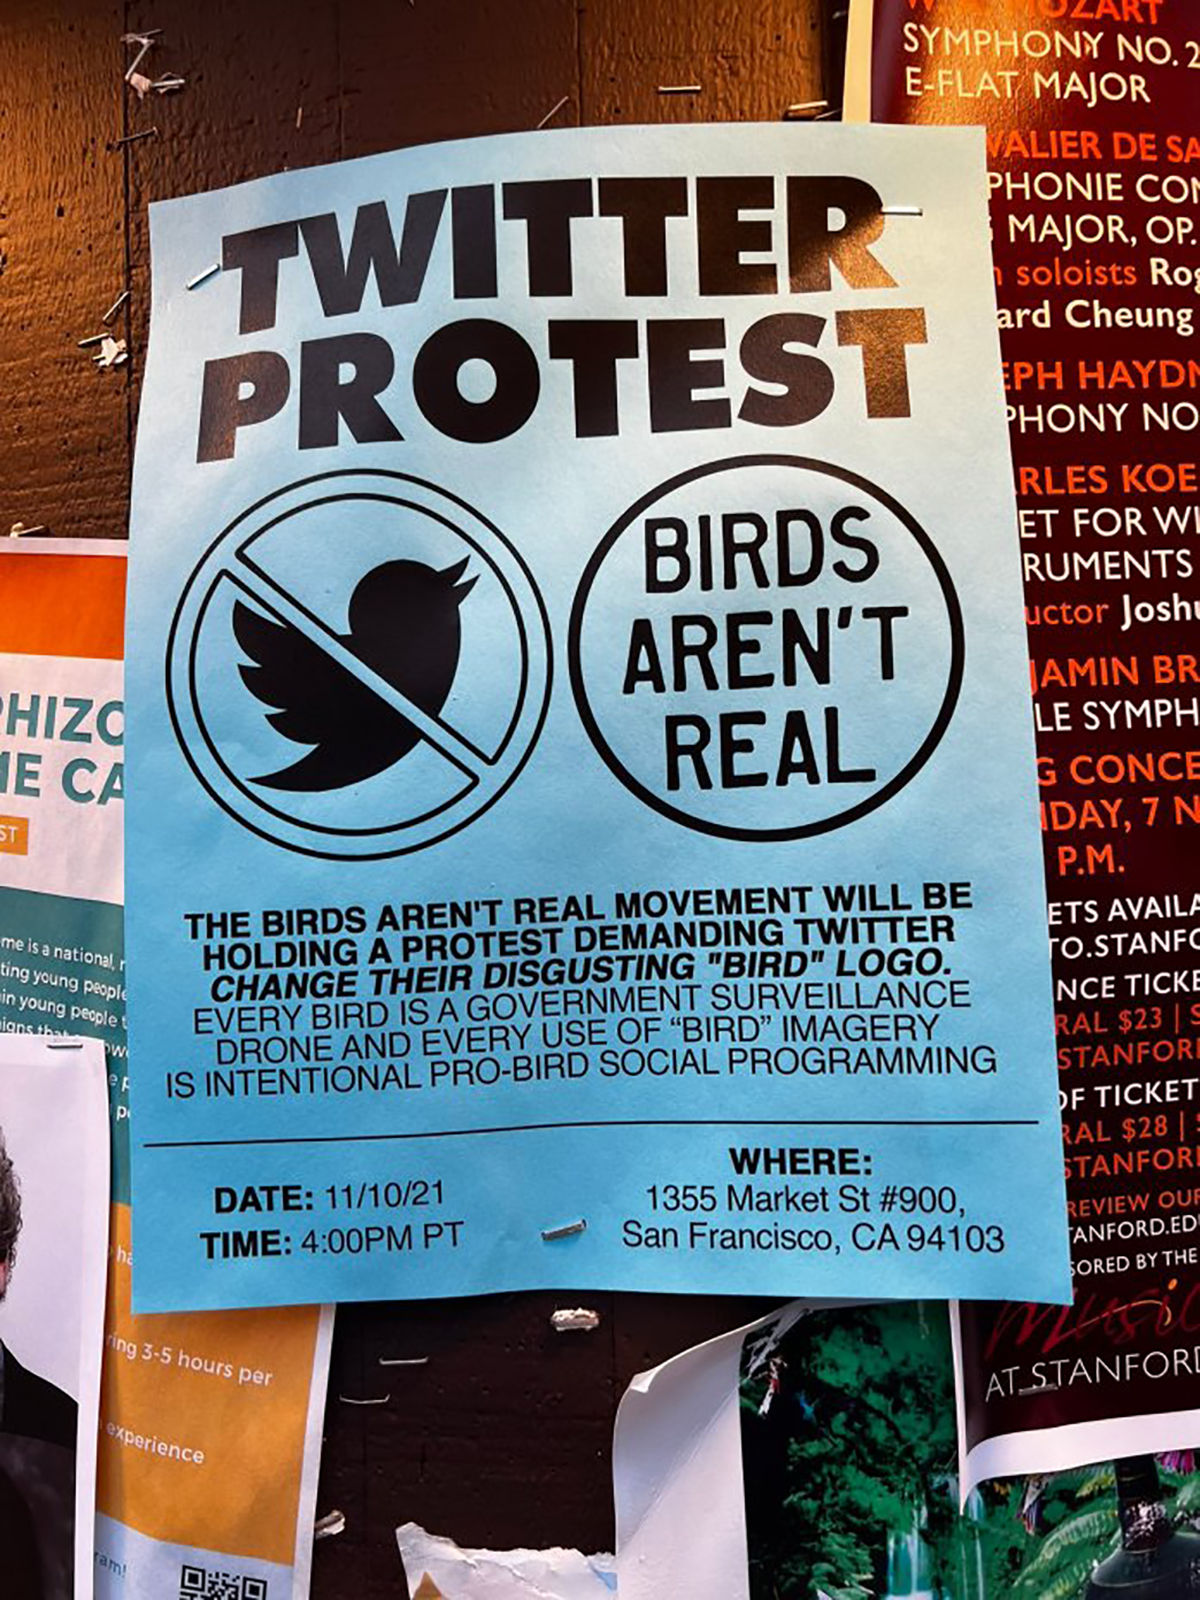 birds arent real poster image